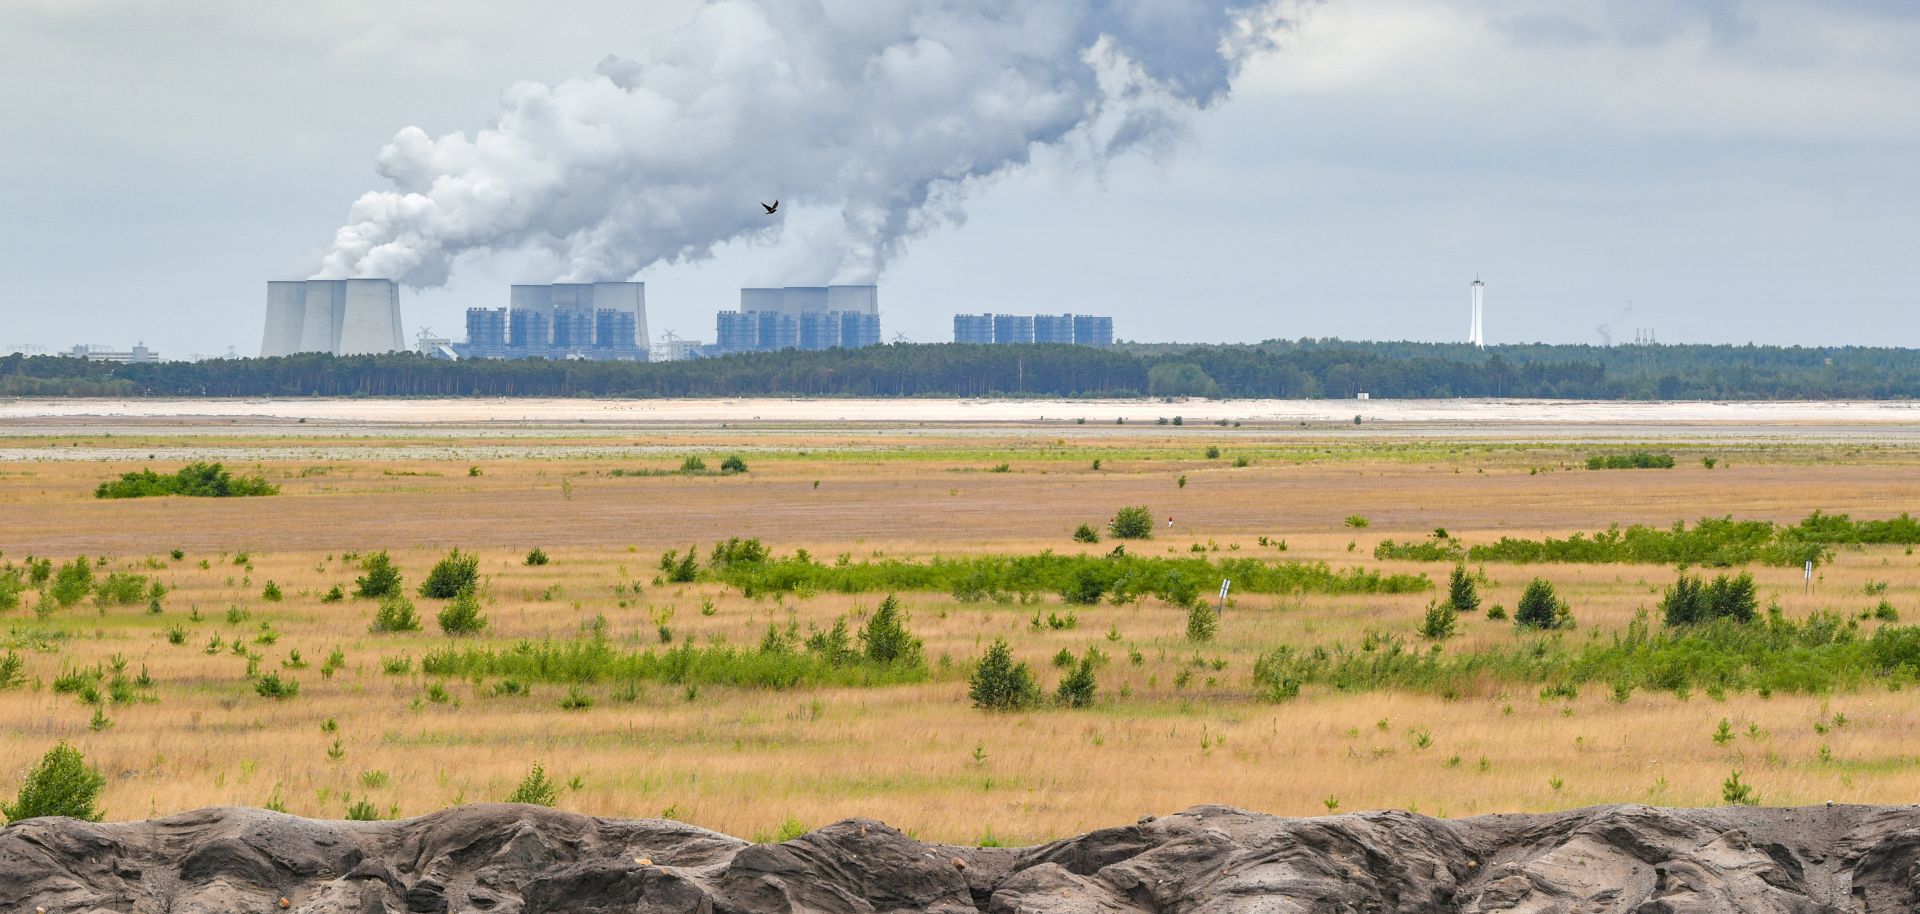 Steaming cooling towers of the Jänschwalde lignite-fired power plant can be seen behind a large field. 